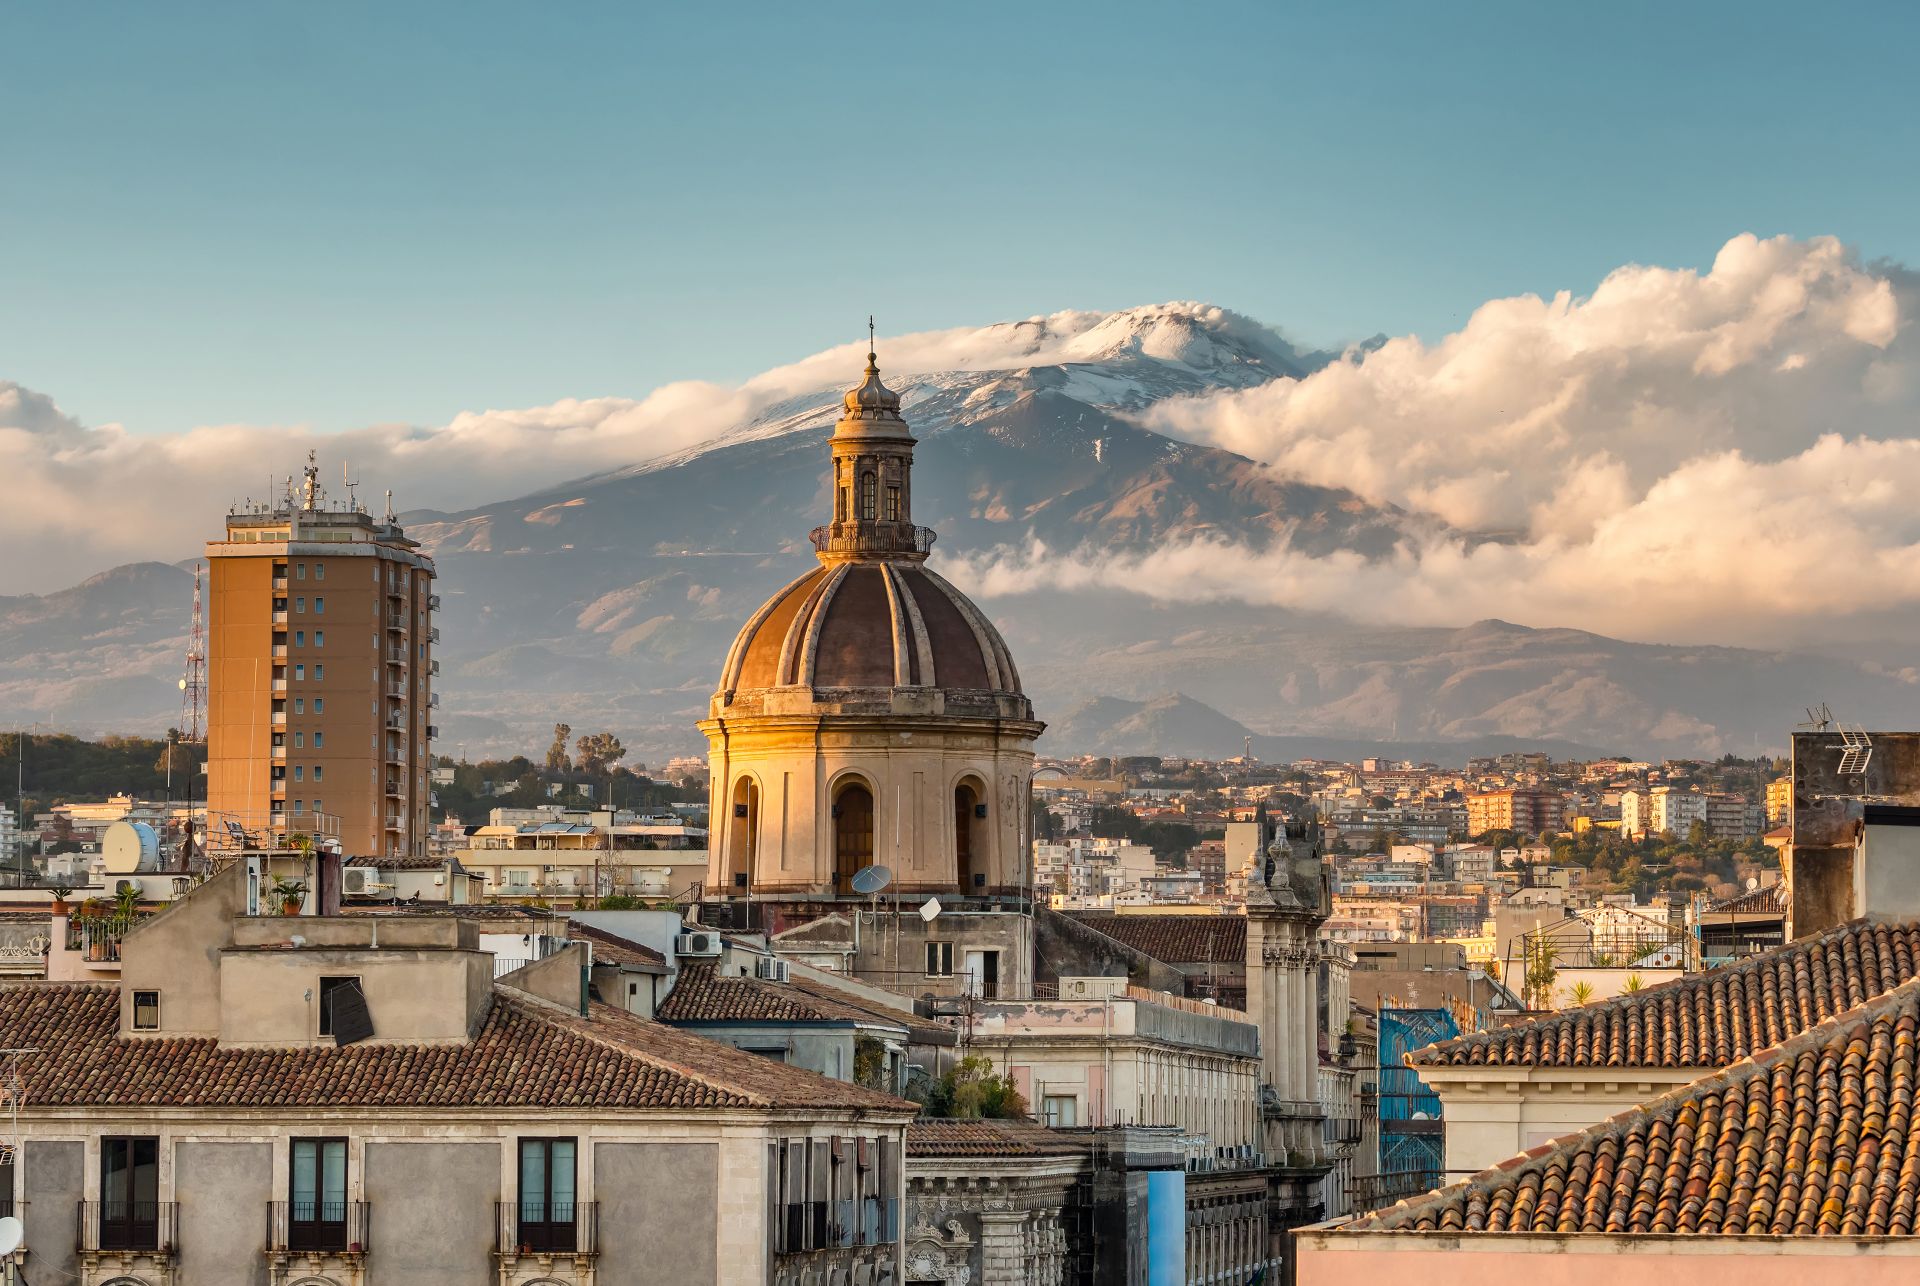 Catania-cityscape-with-the-view-of-Etna-volcano-at-sunset-in-Sicily-Italy